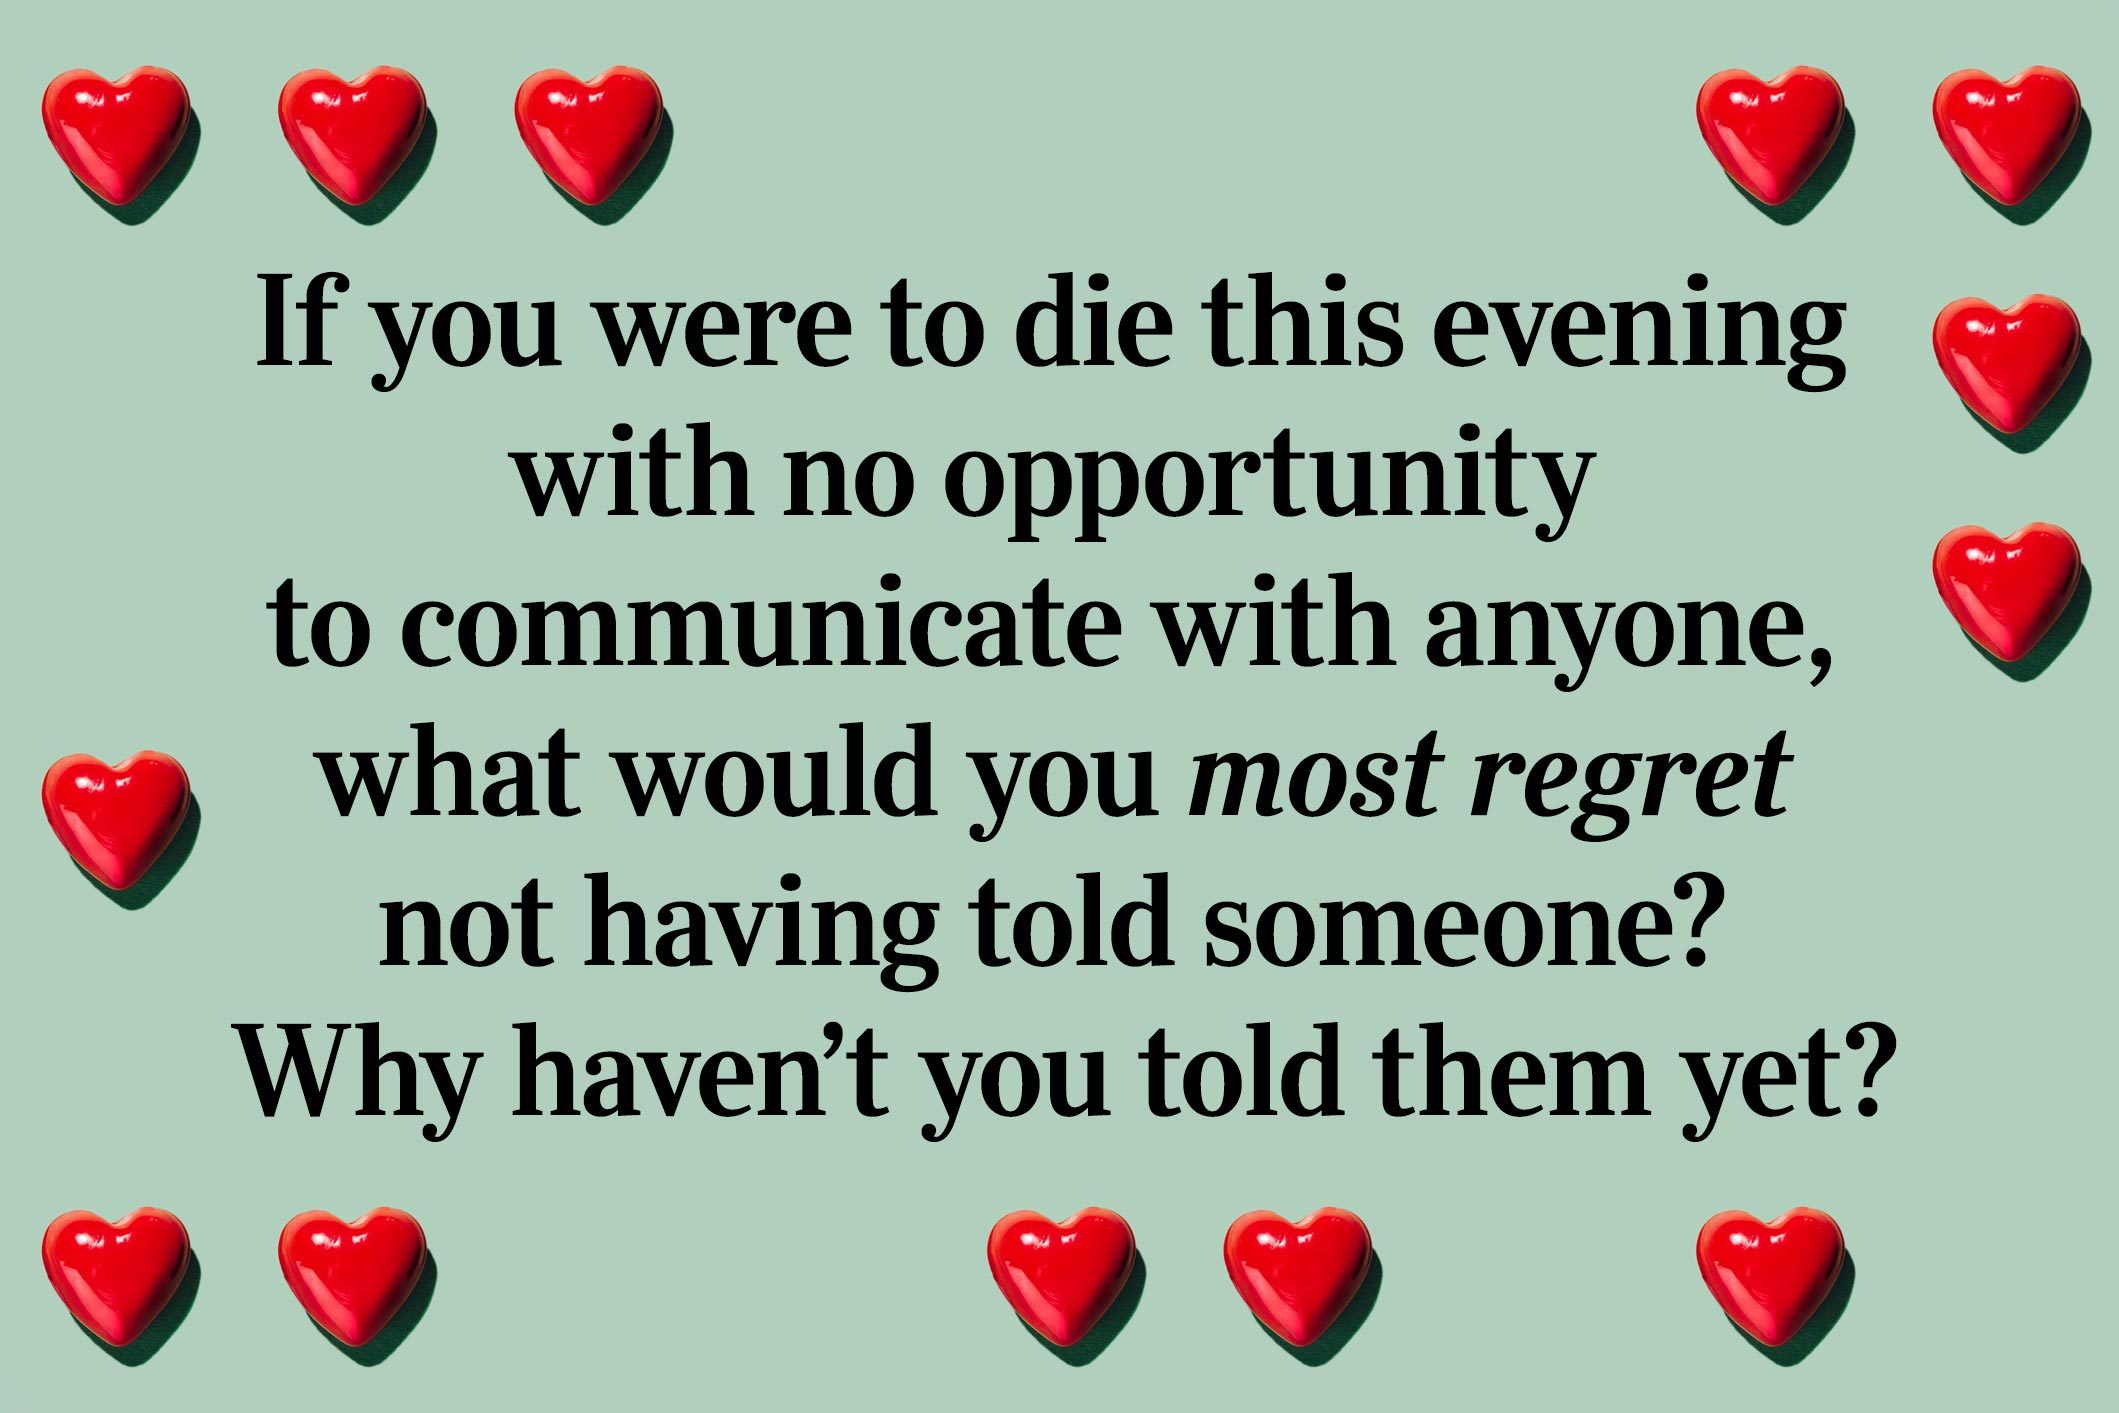 <p>If you were to die this evening with no opportunity to communicate with anyone, what would you most regret not having told someone? Why haven’t you told them yet?</p>